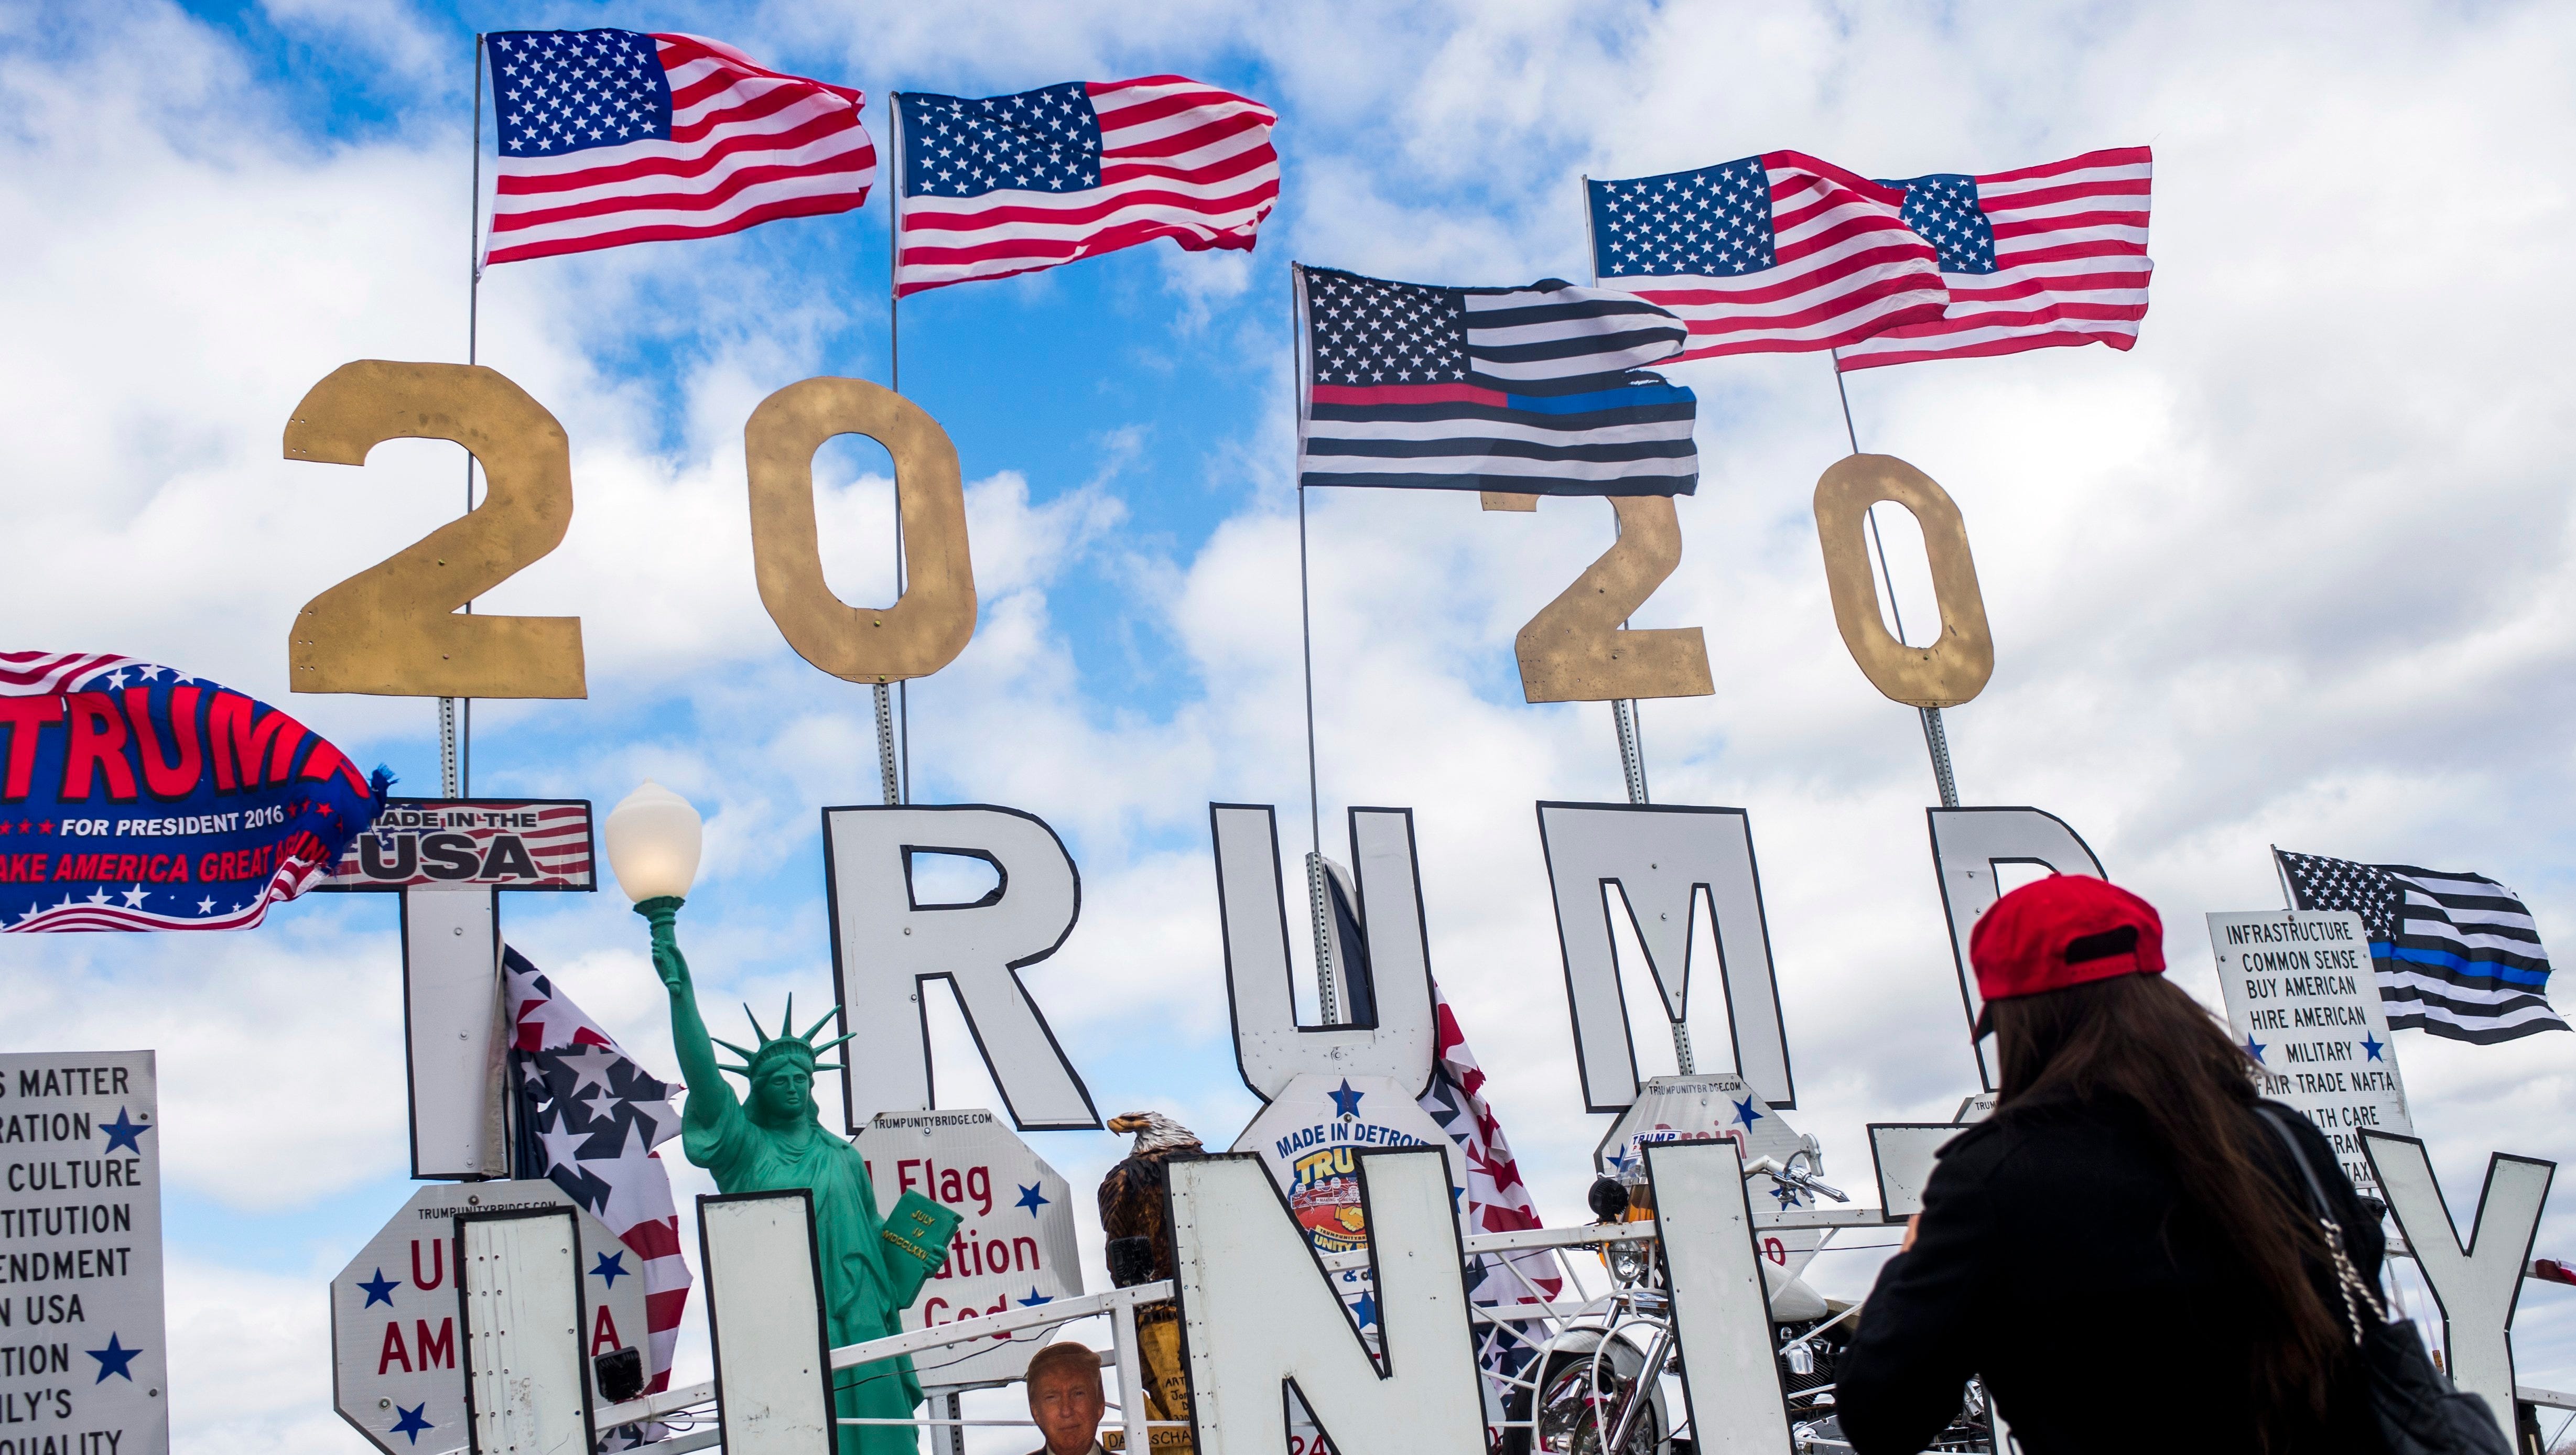 Flags fly high above the Trump Unity Bridge, a mobile float parked outside of the rally's entrance, as thousands of supporters of President Donald J. Trump wait in line Saturday in Washington Township.